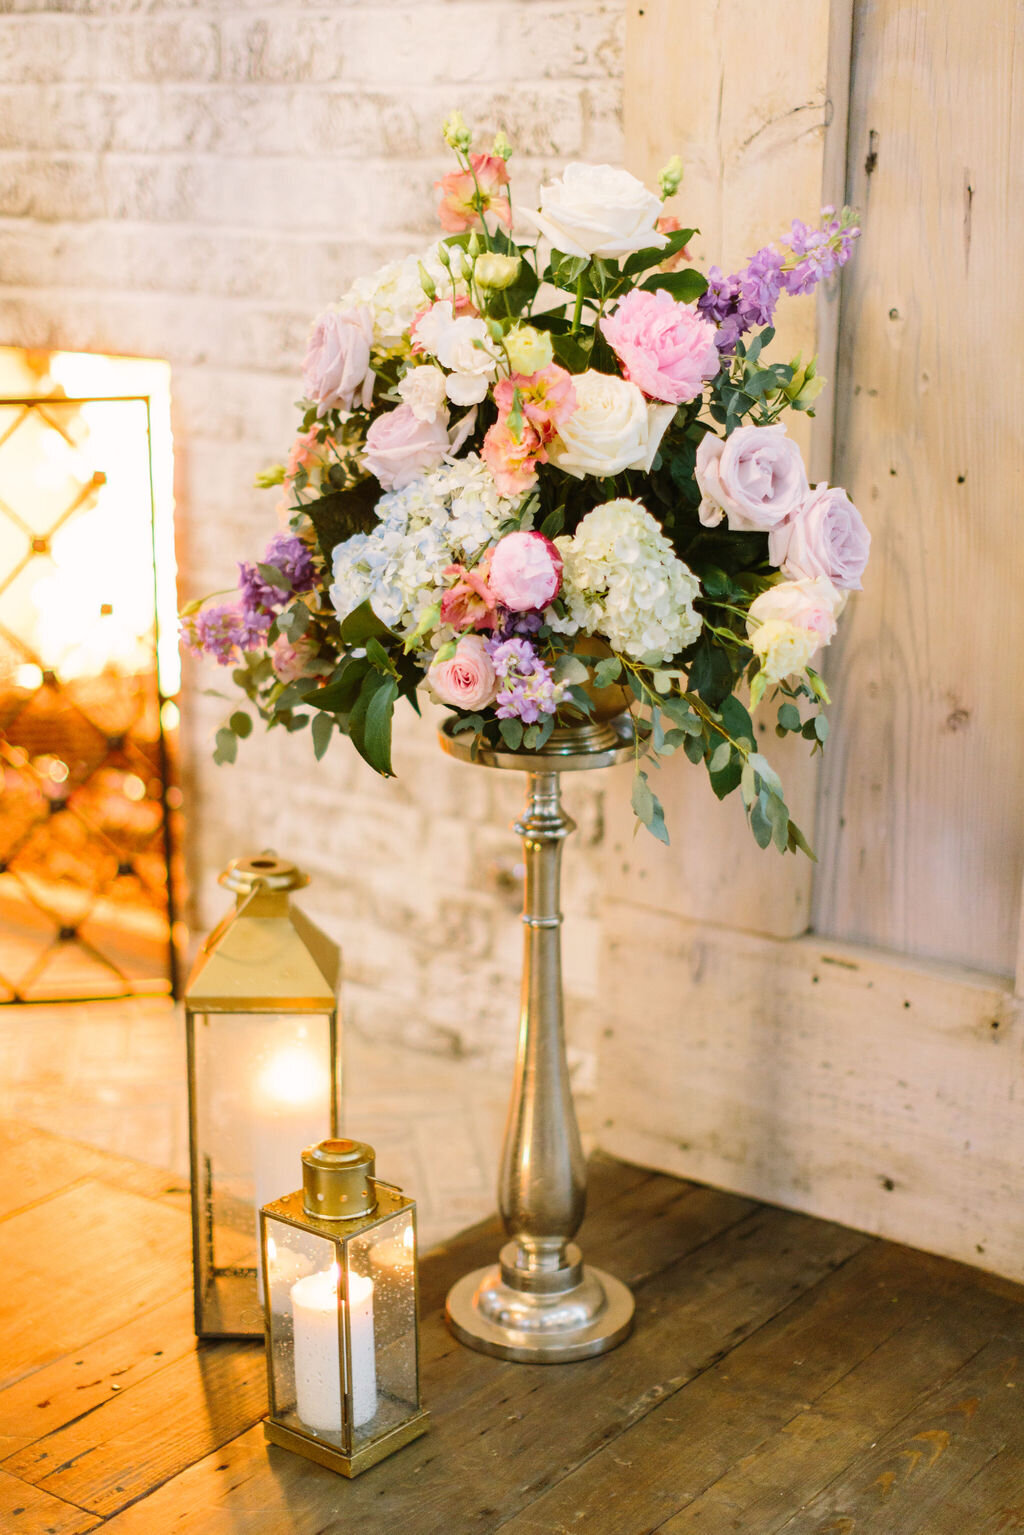 Table with flower centerpiece